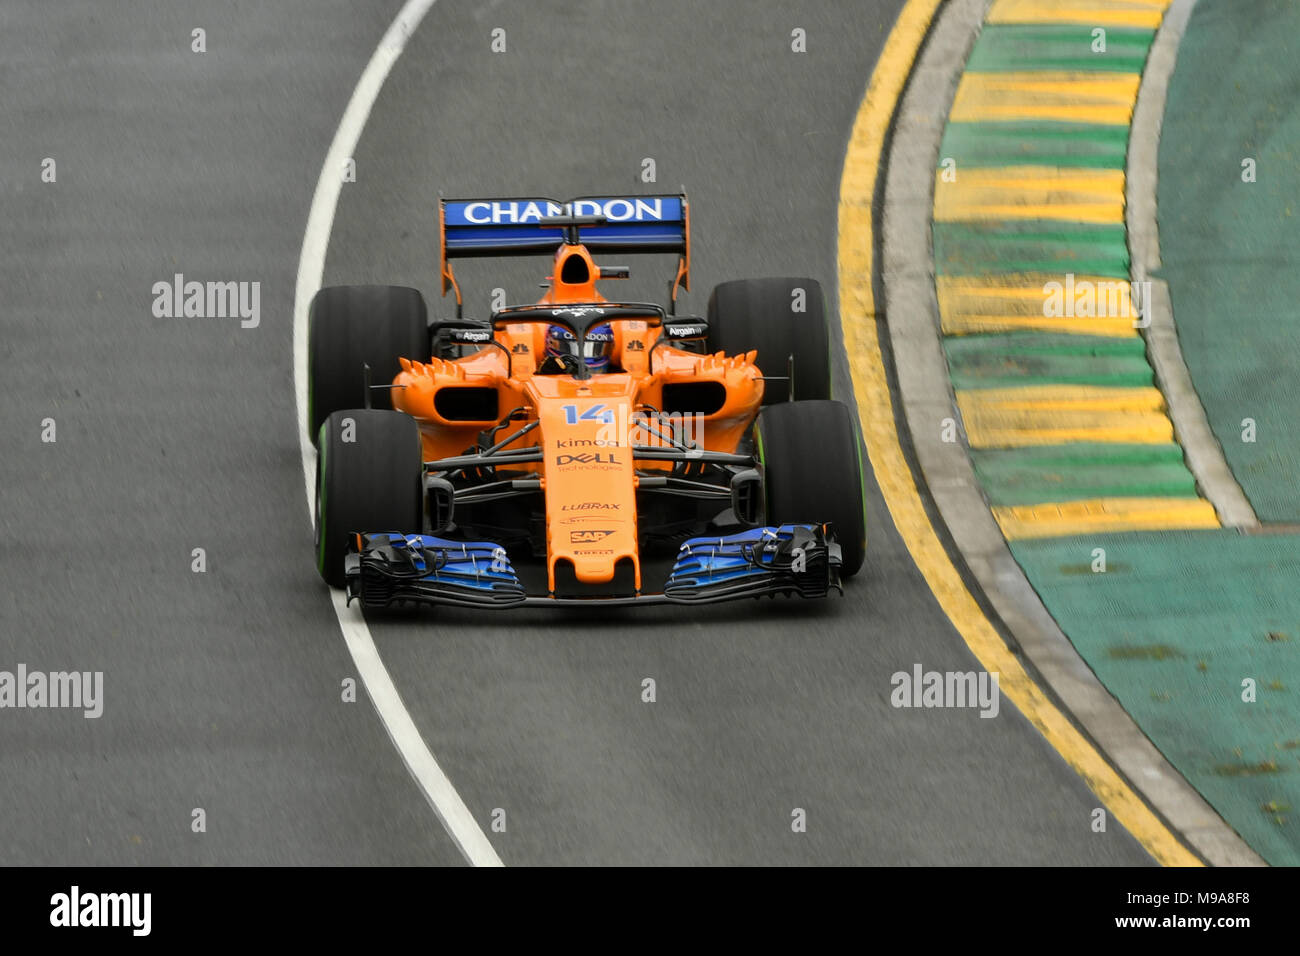 Albert Park, Melbourne, Australia. 24th Mar, 2018. Fernando Alonso (ESP) #14 from the McLaren F1 team during practice session three at the 2018 Australian Formula One Grand Prix at Albert Park, Melbourne, Australia. Sydney Low/Cal Sport Media/Alamy Live News Stock Photo